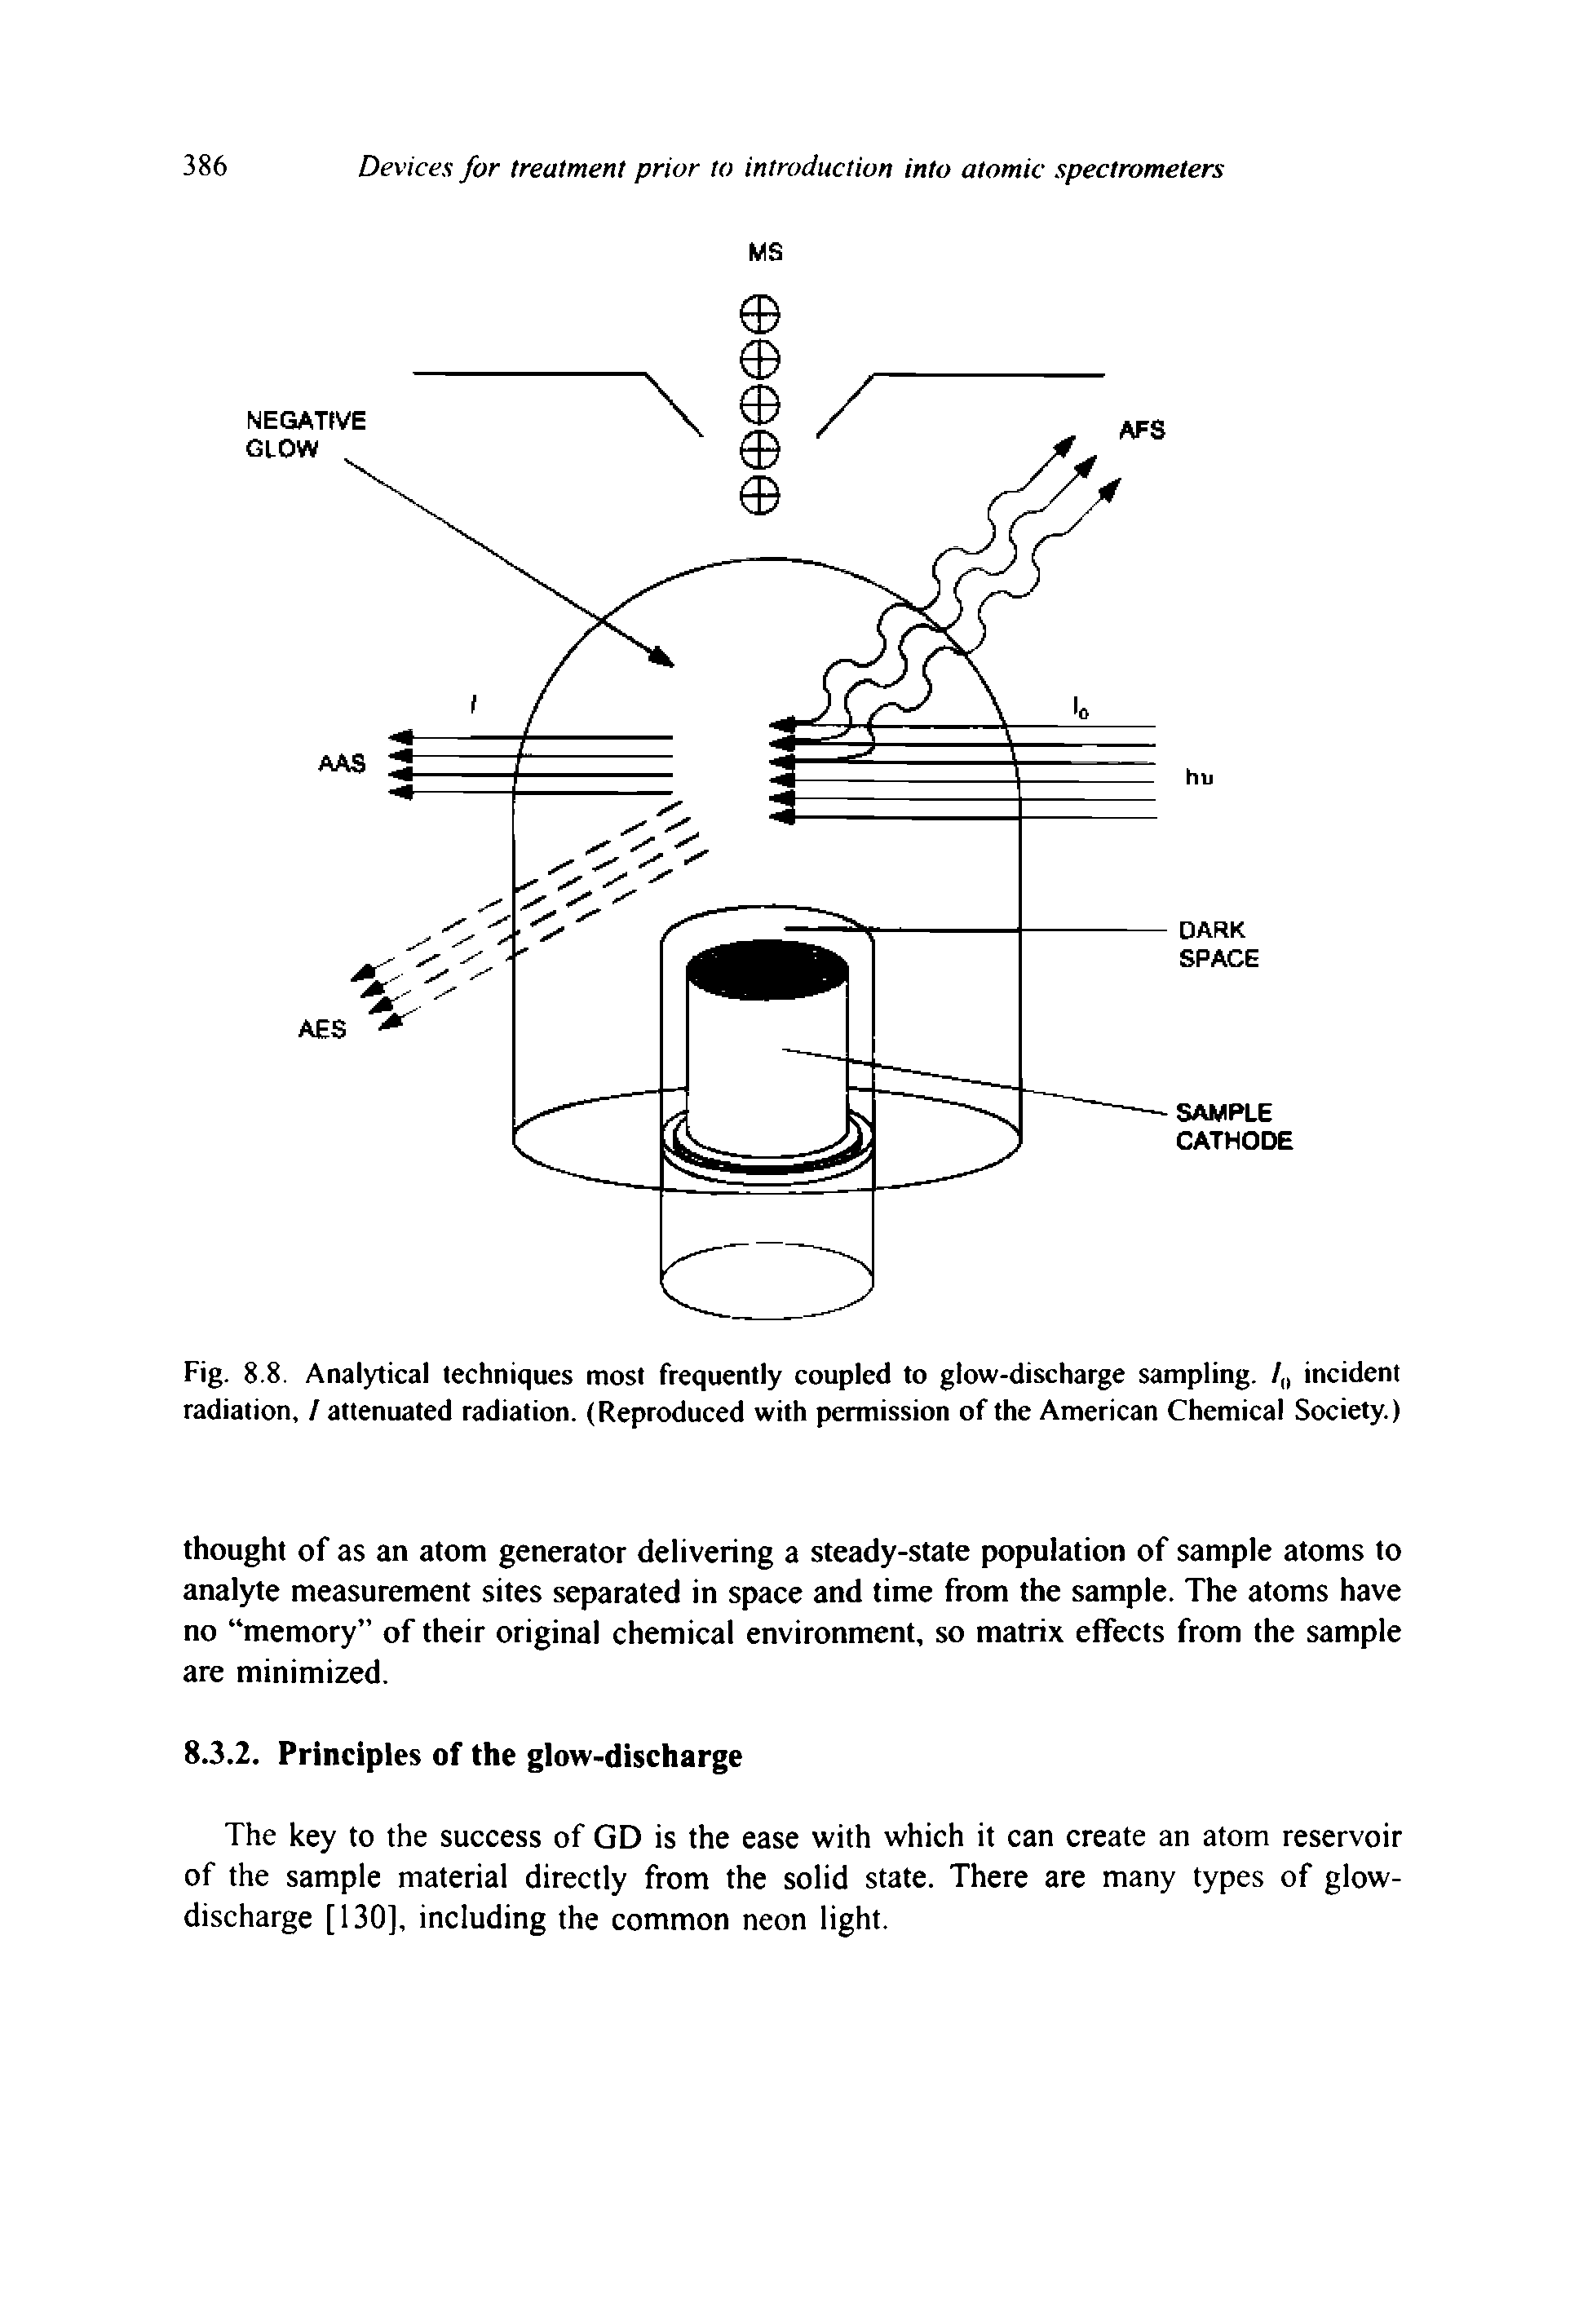 Fig. 8.8. Analytical techniques most frequently coupled to glow-discharge sampling. / incident radiation, / attenuated radiation. (Reproduced with permission of the American Chemical Society.)...